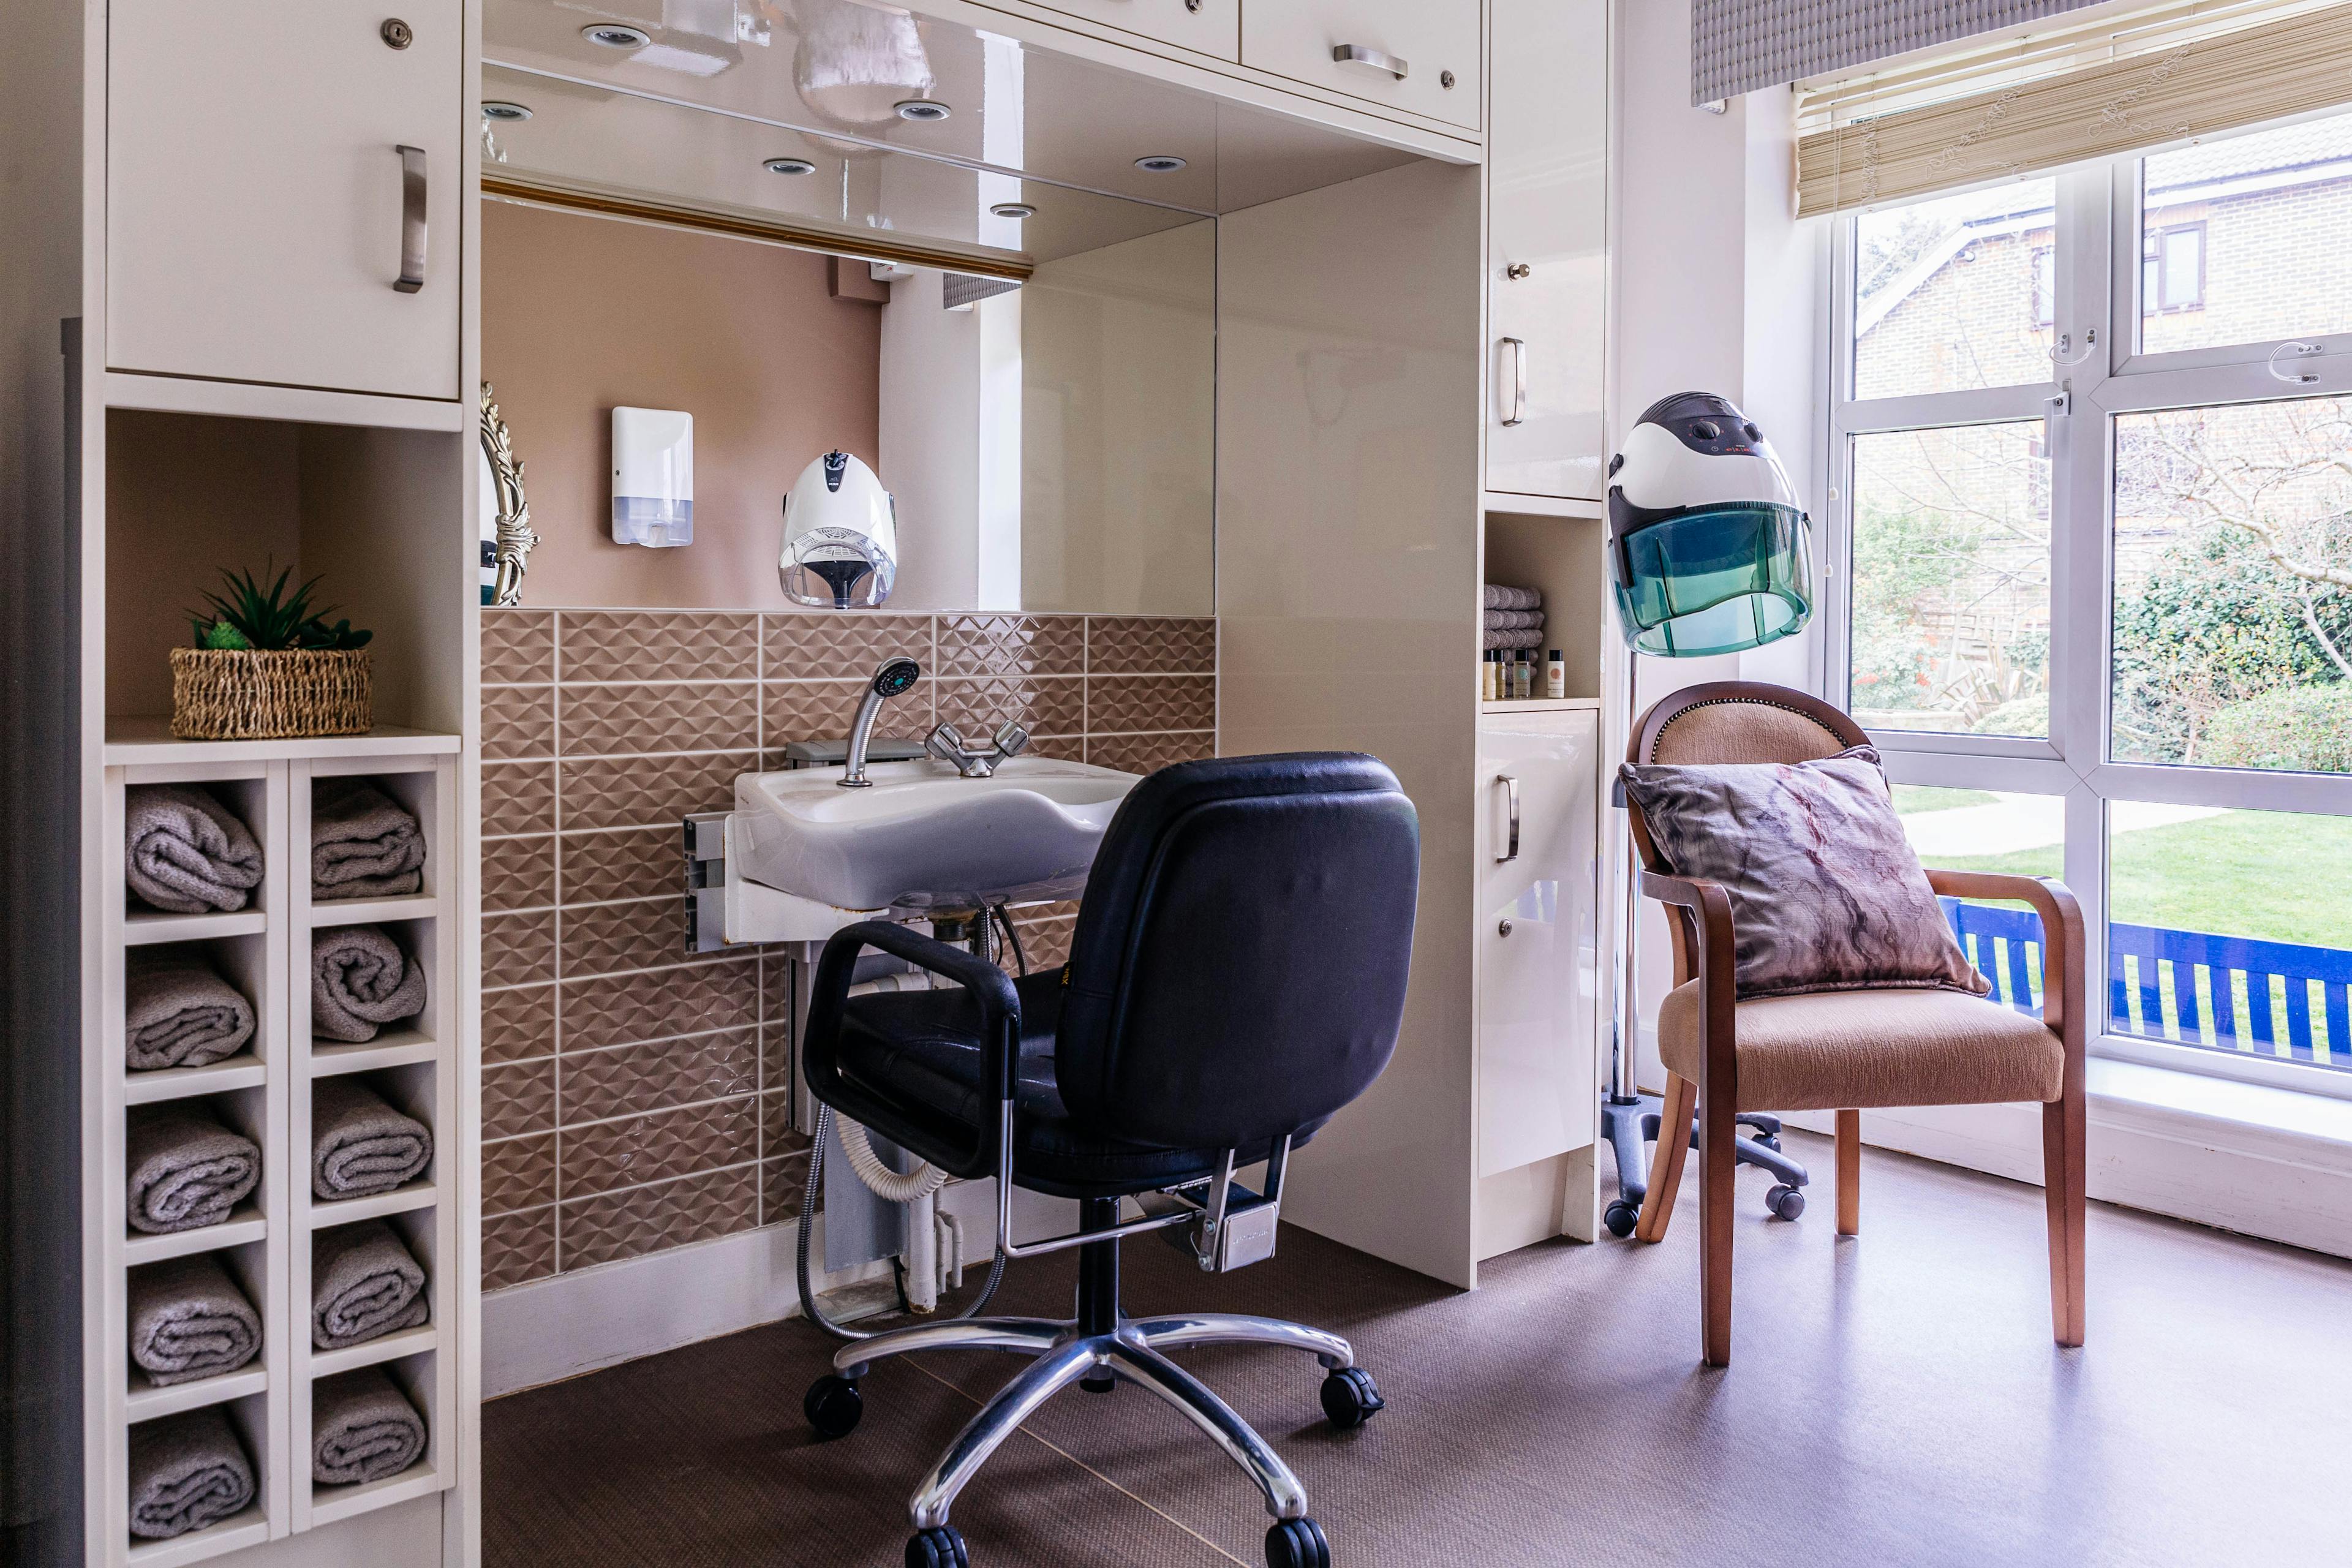 Salon at Magnolia Court Care Home in London, England